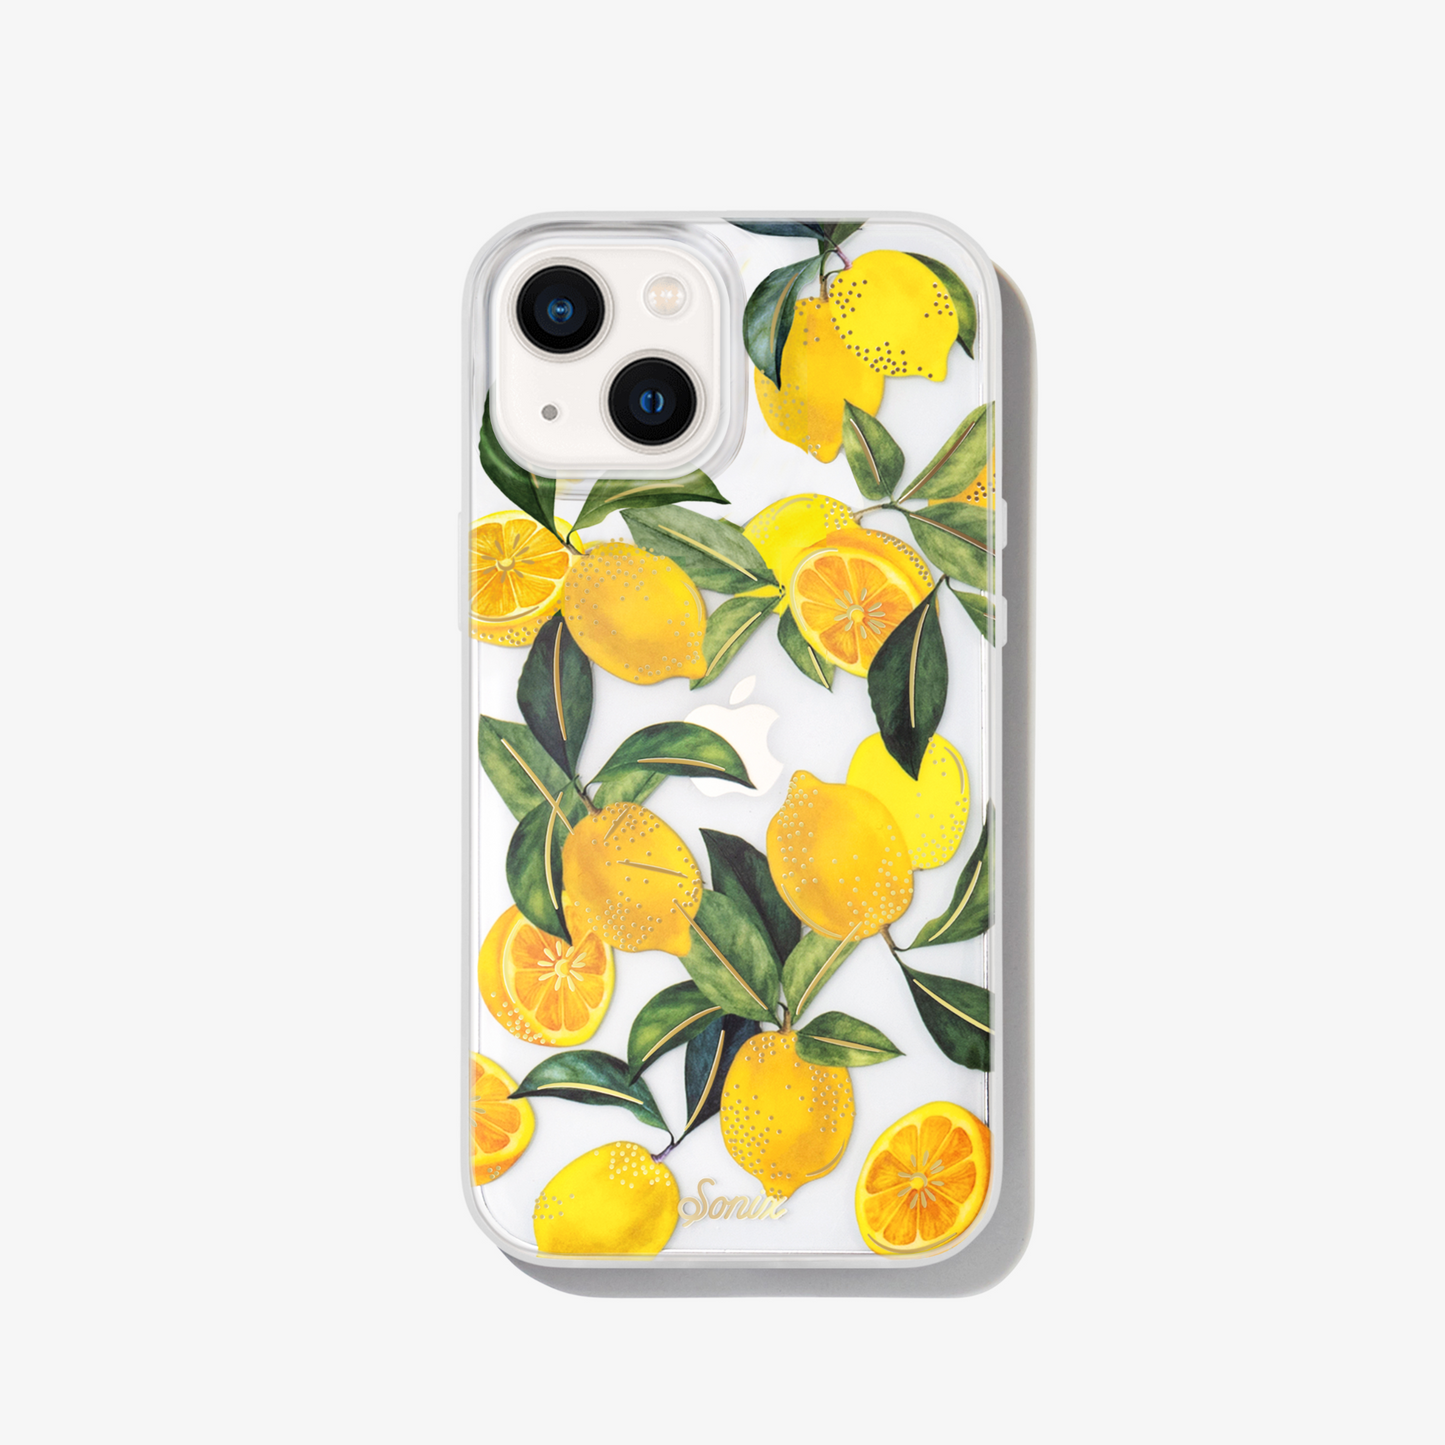 Lemons with green foliage and gold foiling shown on an iphone 12